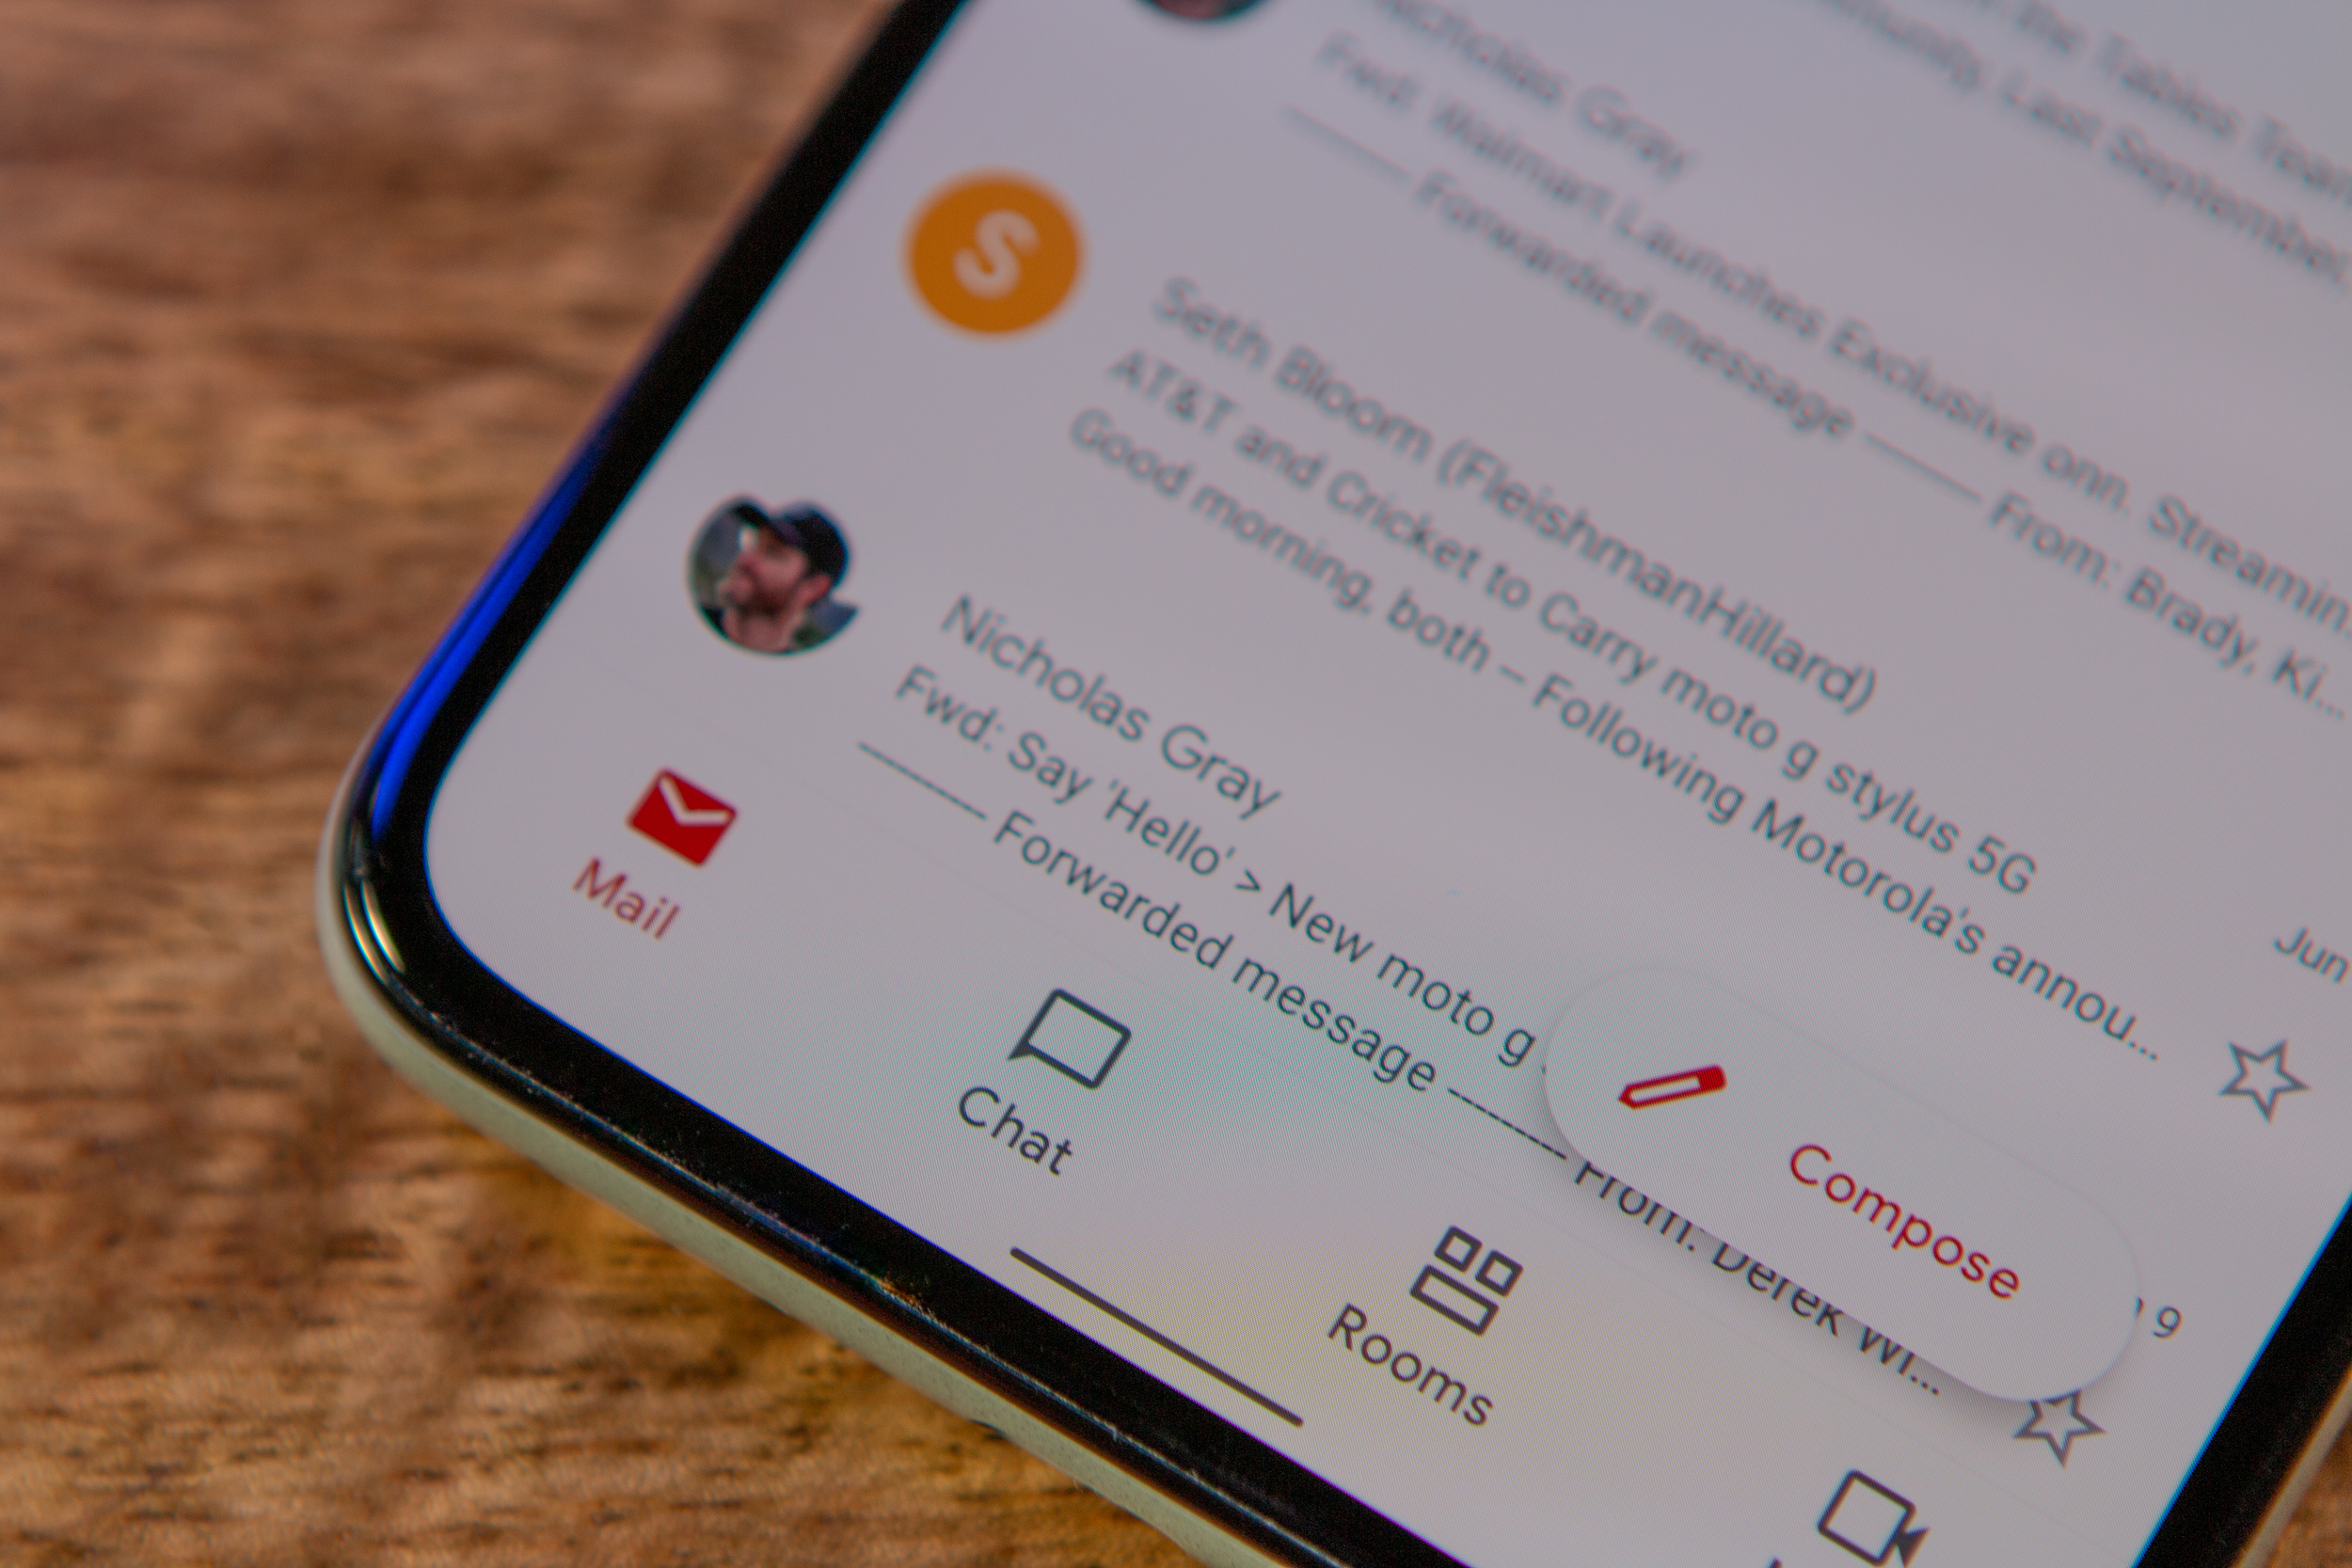 Gmail is turning email into a more casual experience